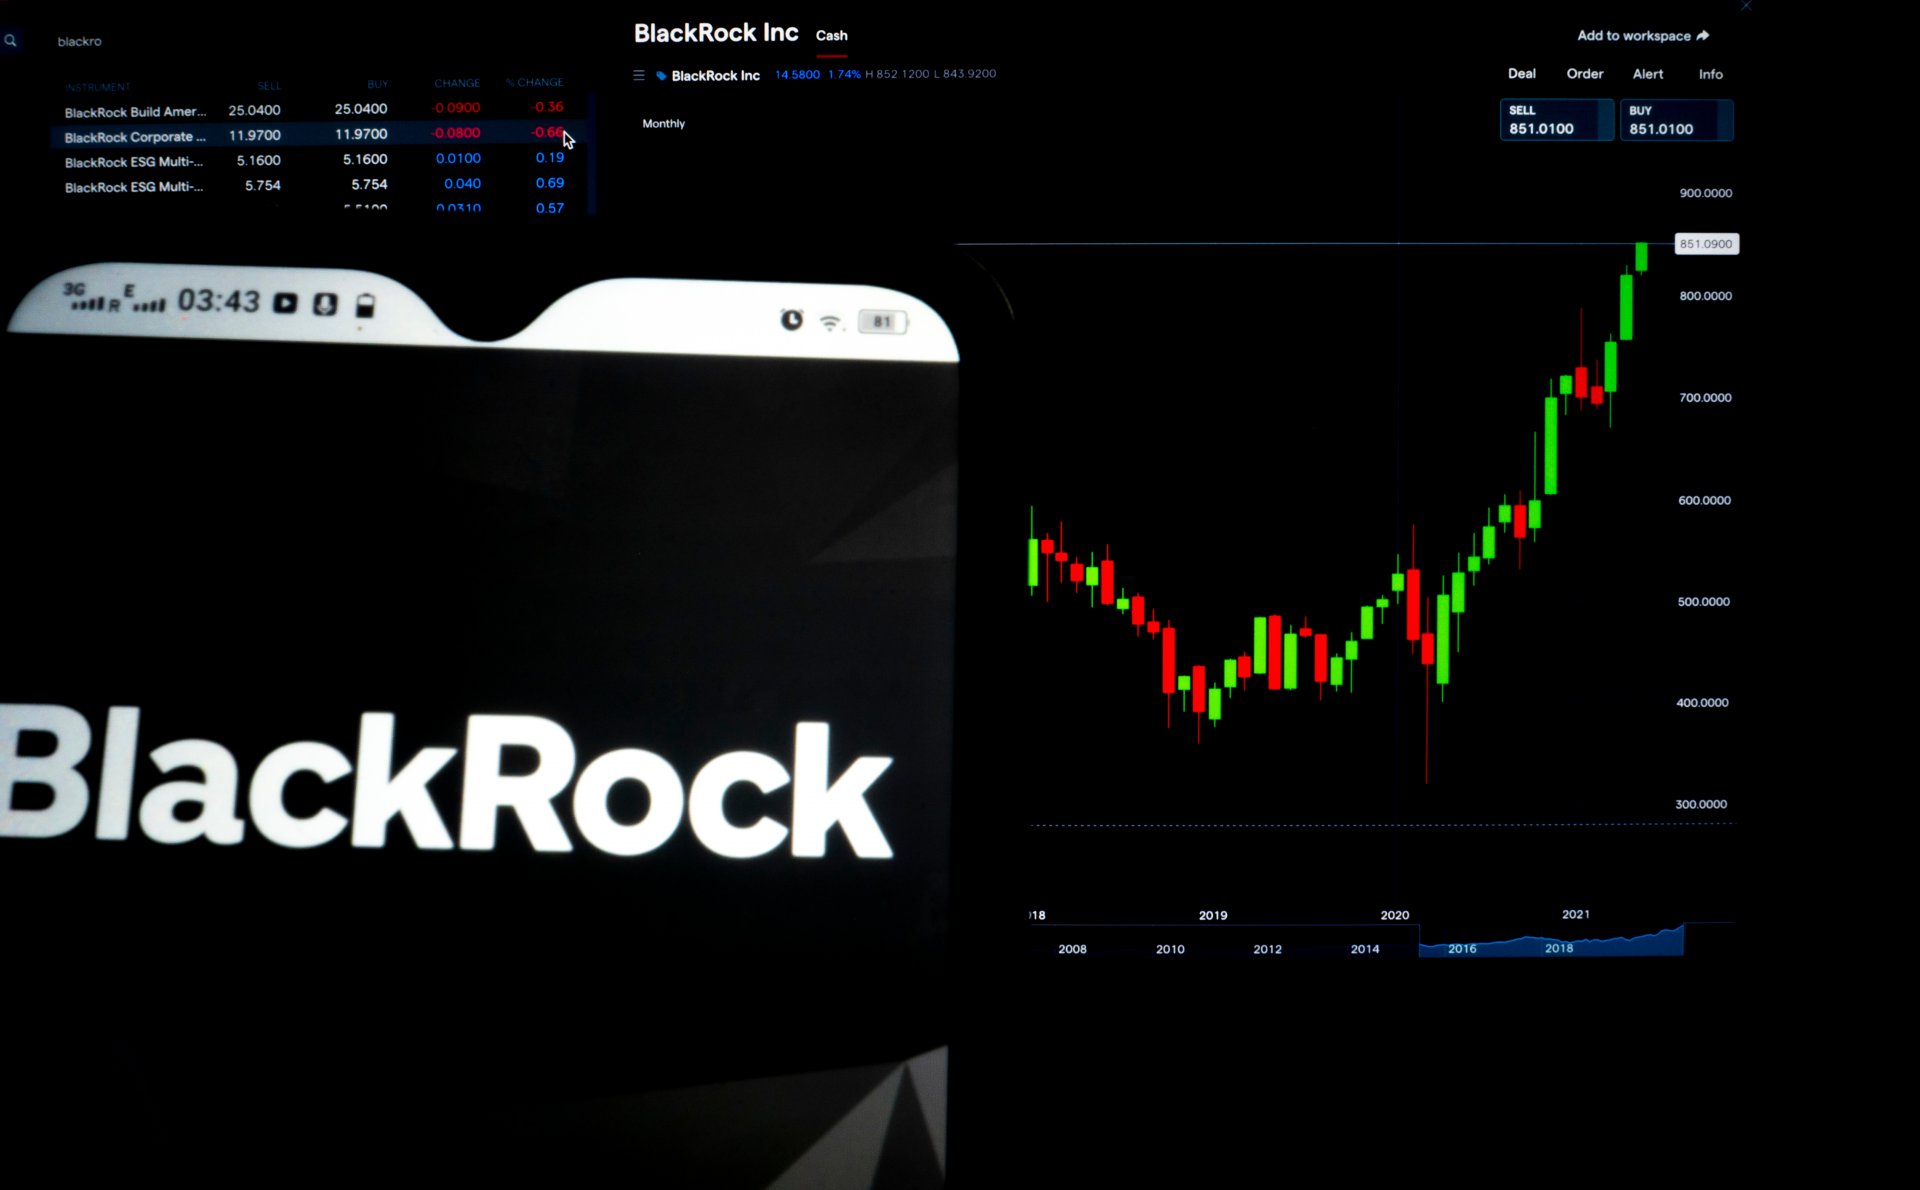 BlackRock Inc. logo displayed on a smartphone with the stock chart of BlackRock Inc. in the background.